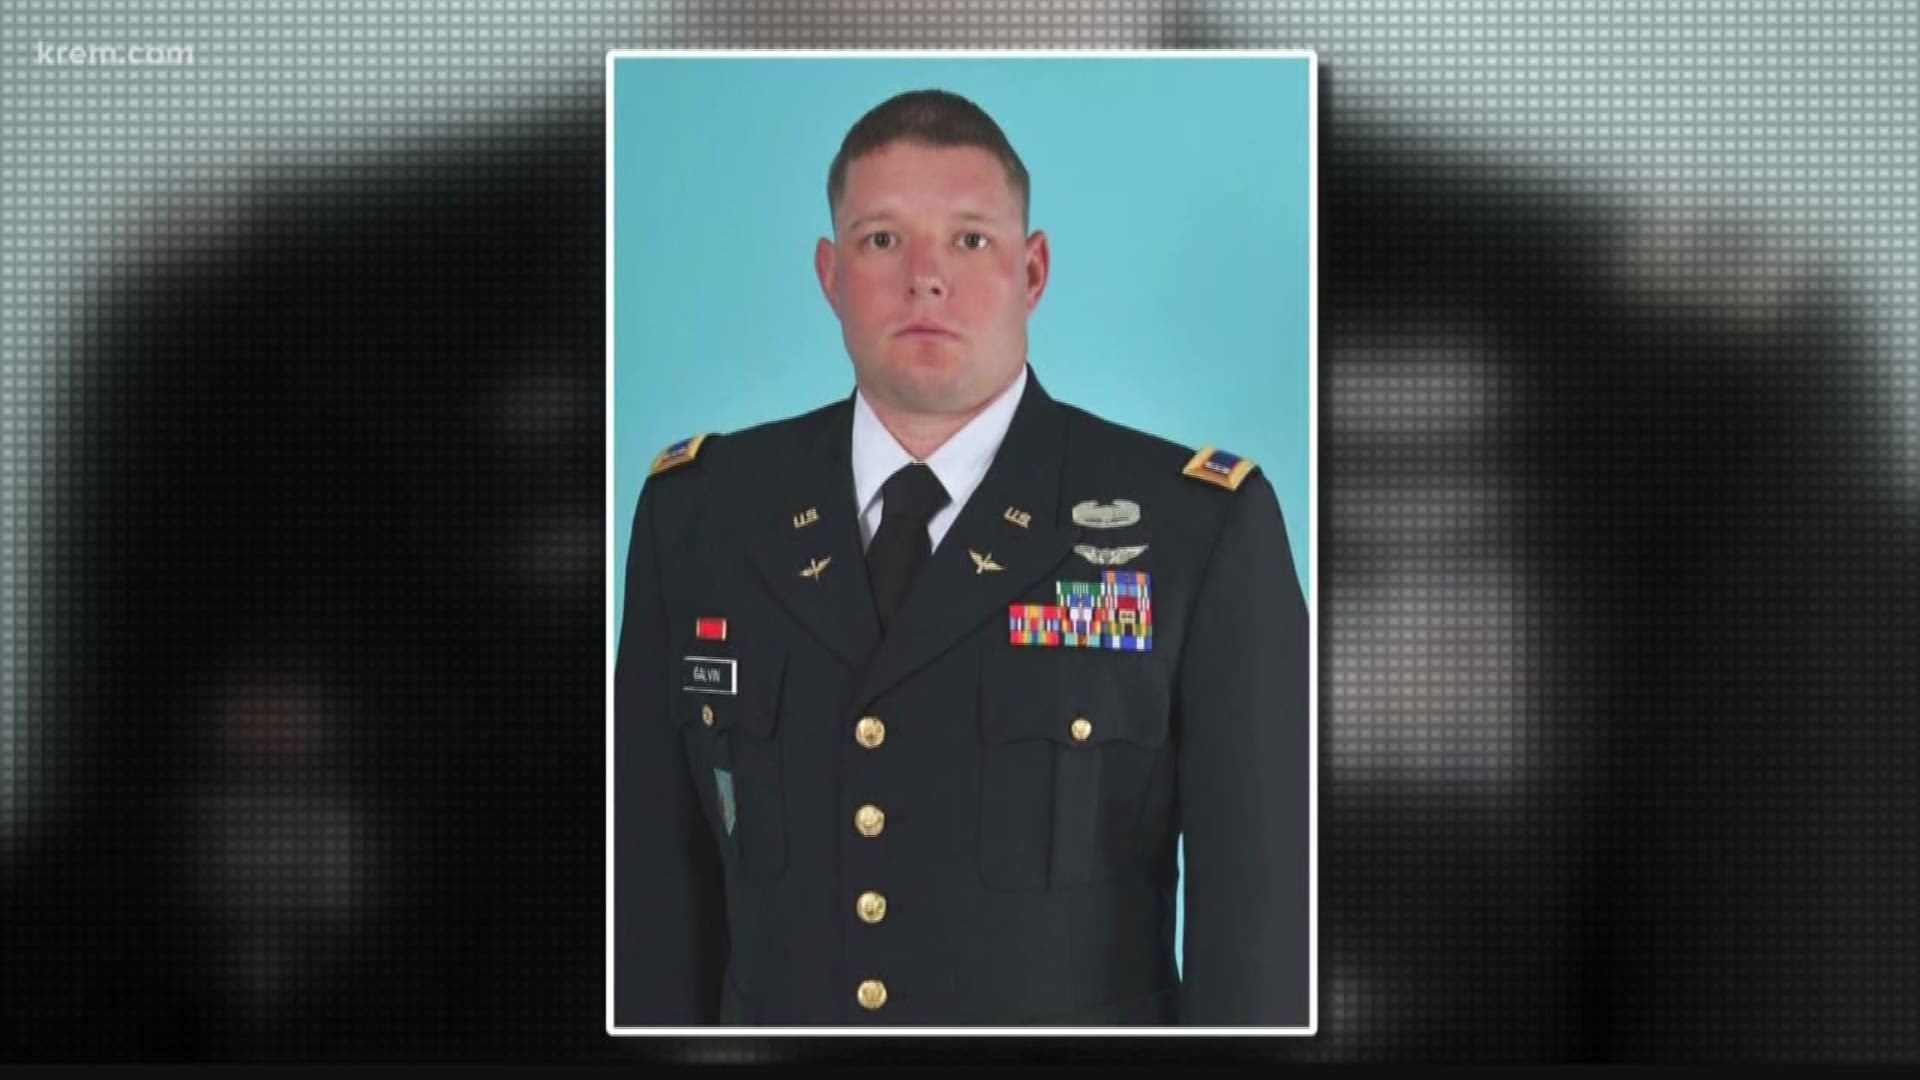 According to the U.S. Department of Defense, Chief Warrant Officer 3 Taylor J. Galvin, 34, of Spokane, died from his injuries in Baghdad.